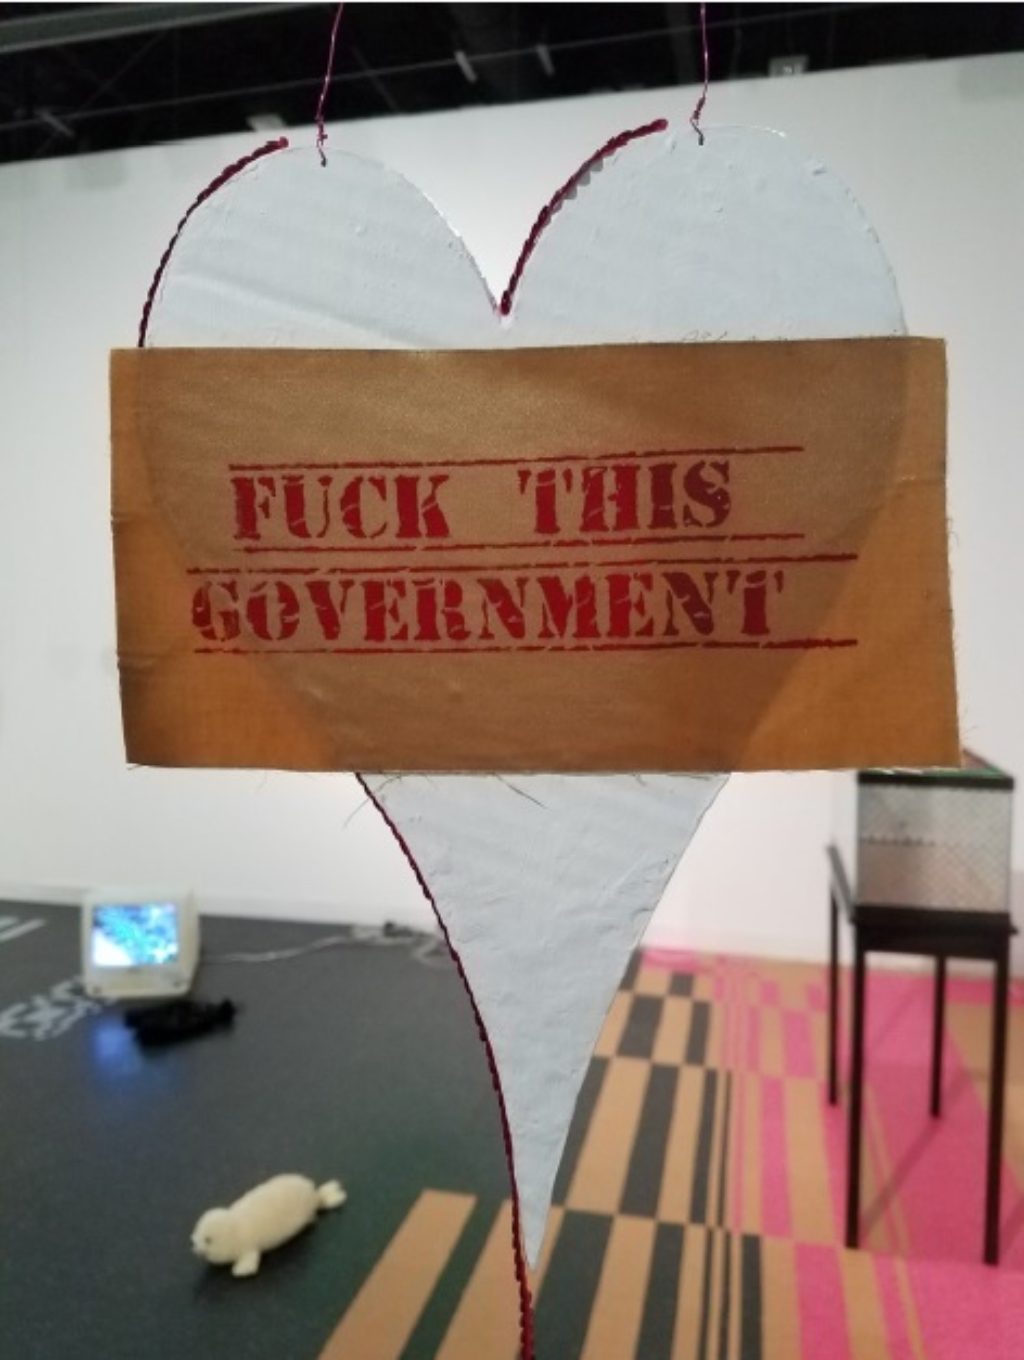 Maggie Lee, Fthis.gov, 2016 gesso, modge podge, cardboard, laser photocopy, acrylic, wire, silkscreen on fabric Heart: 13 x 9 inches (33.02 x 22.86 cm),Sequined string: 79 inches (200.66 cm),Hanging wire: 54 inches (137.16 cm) Photo courtesy of the gallery.